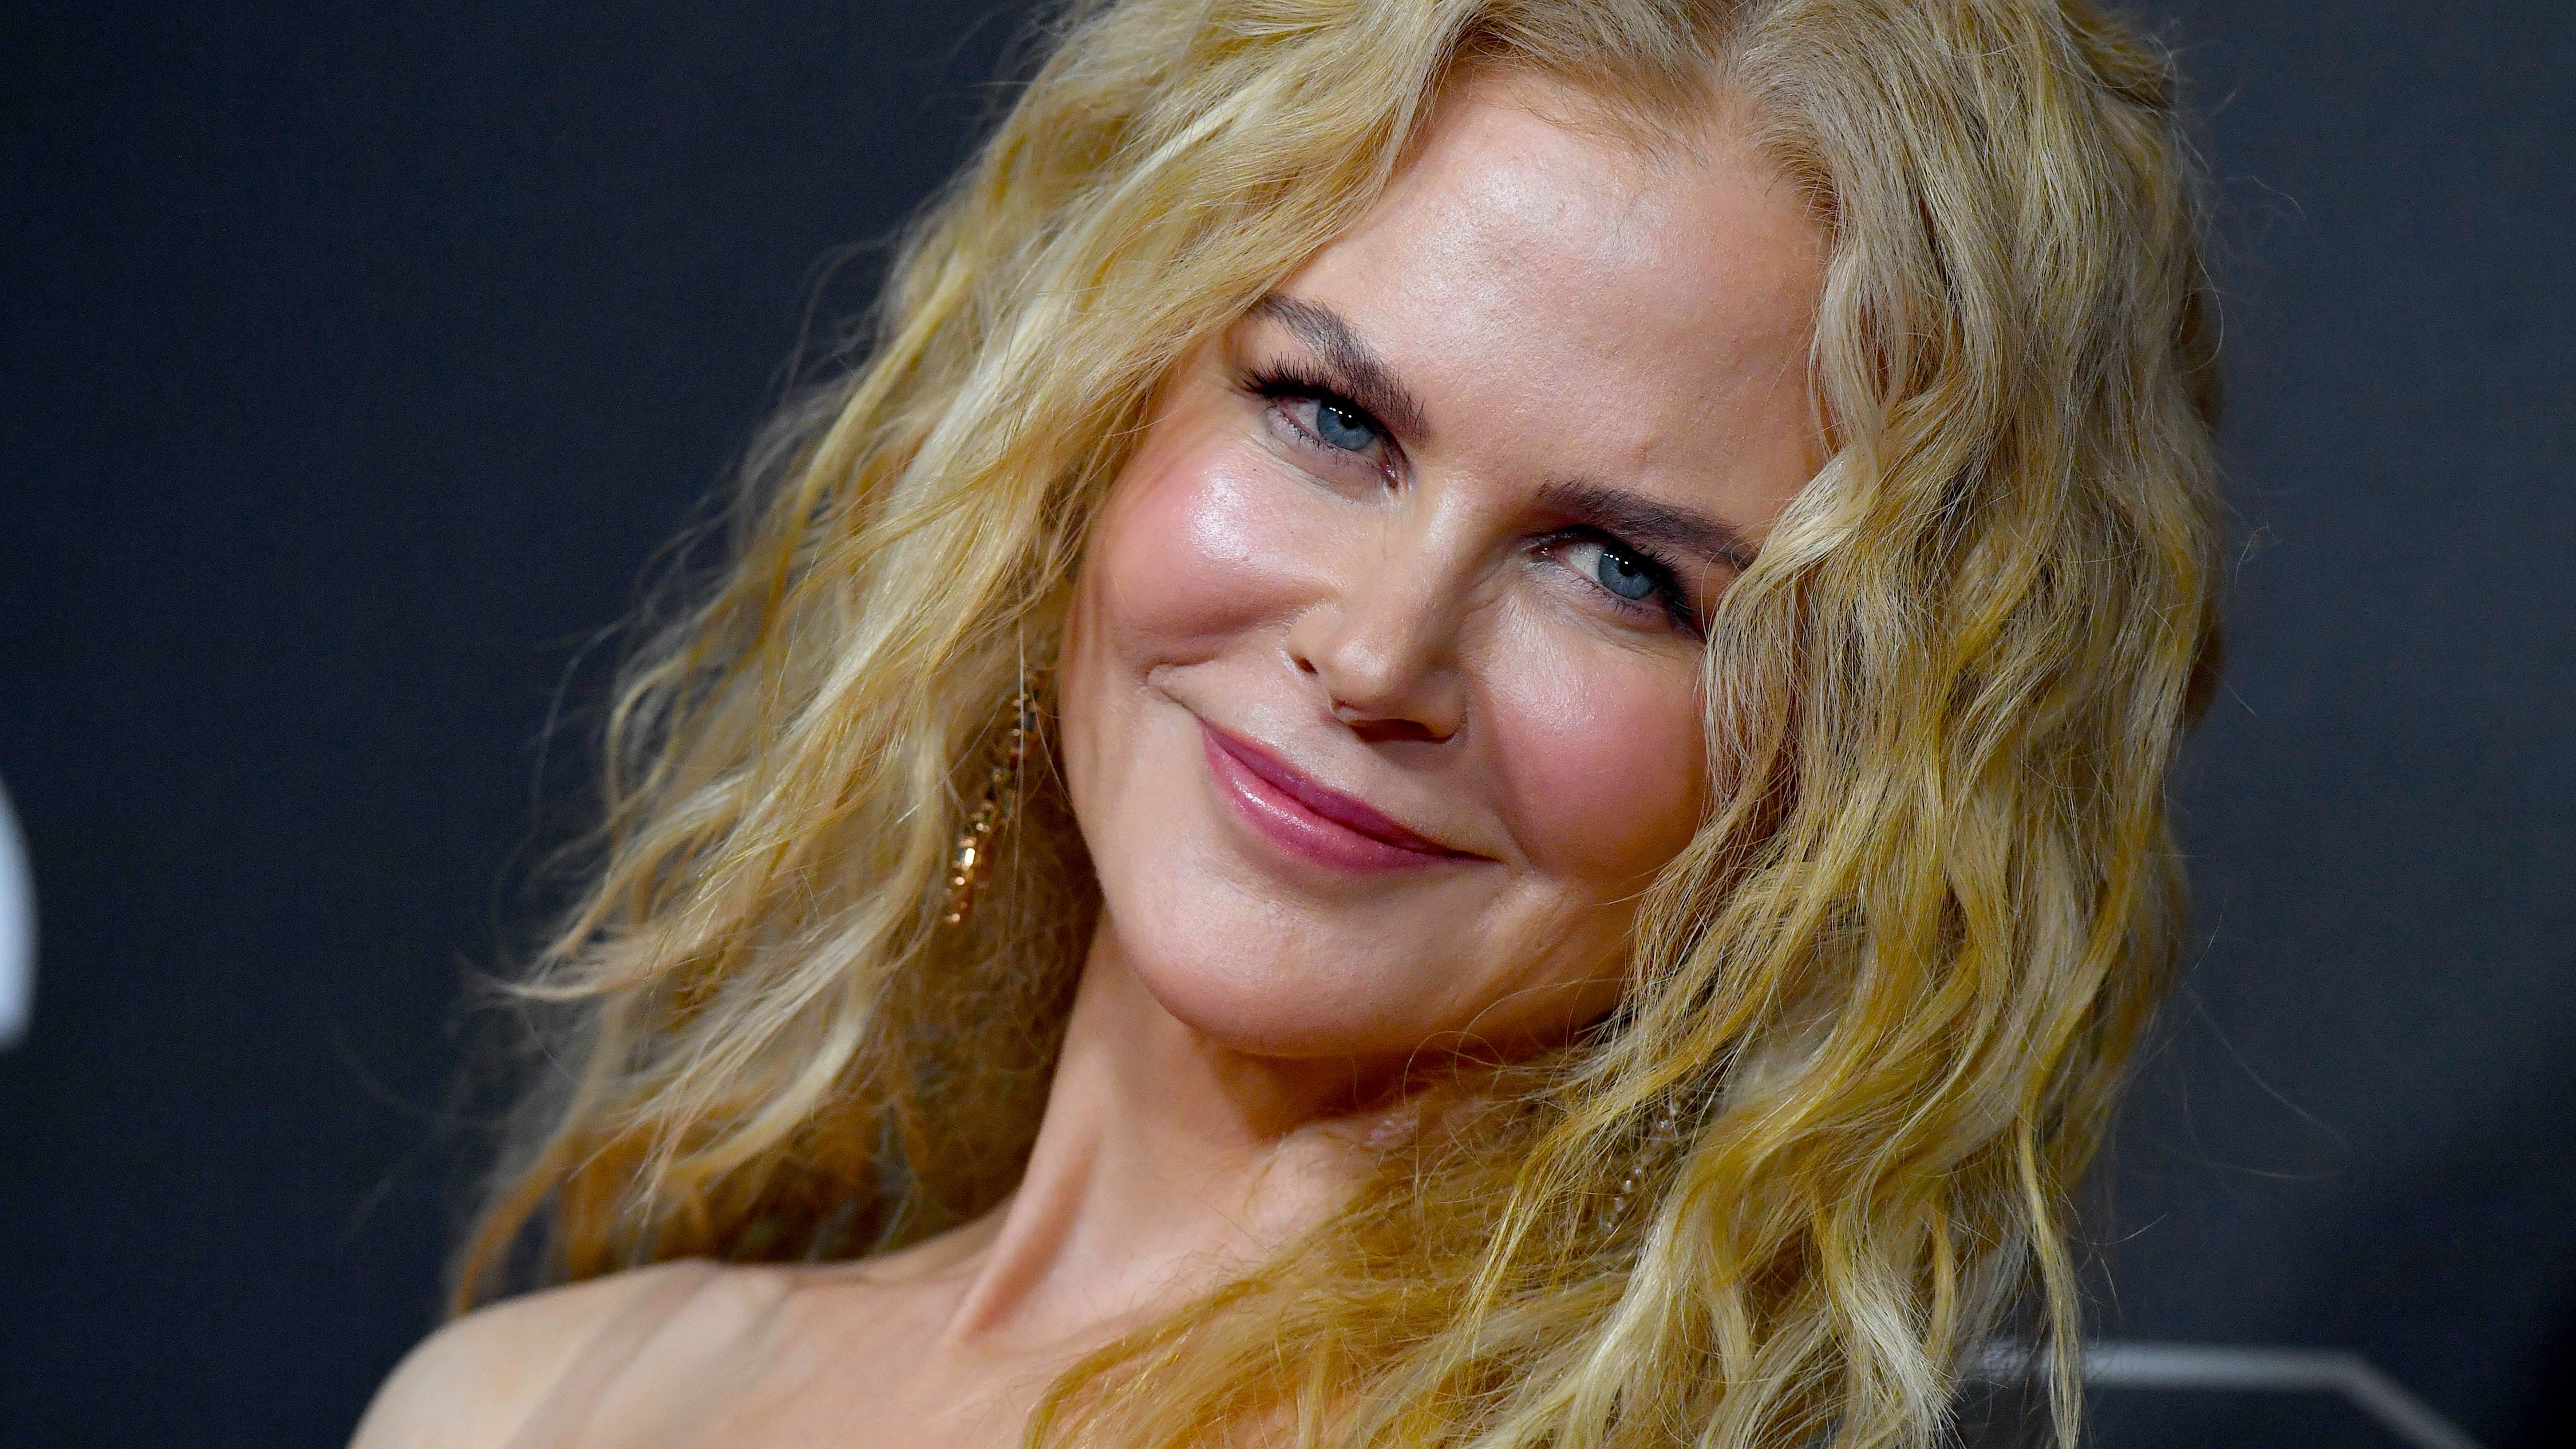 Nicole Kidman shows some skin in stunning backless gown with thigh